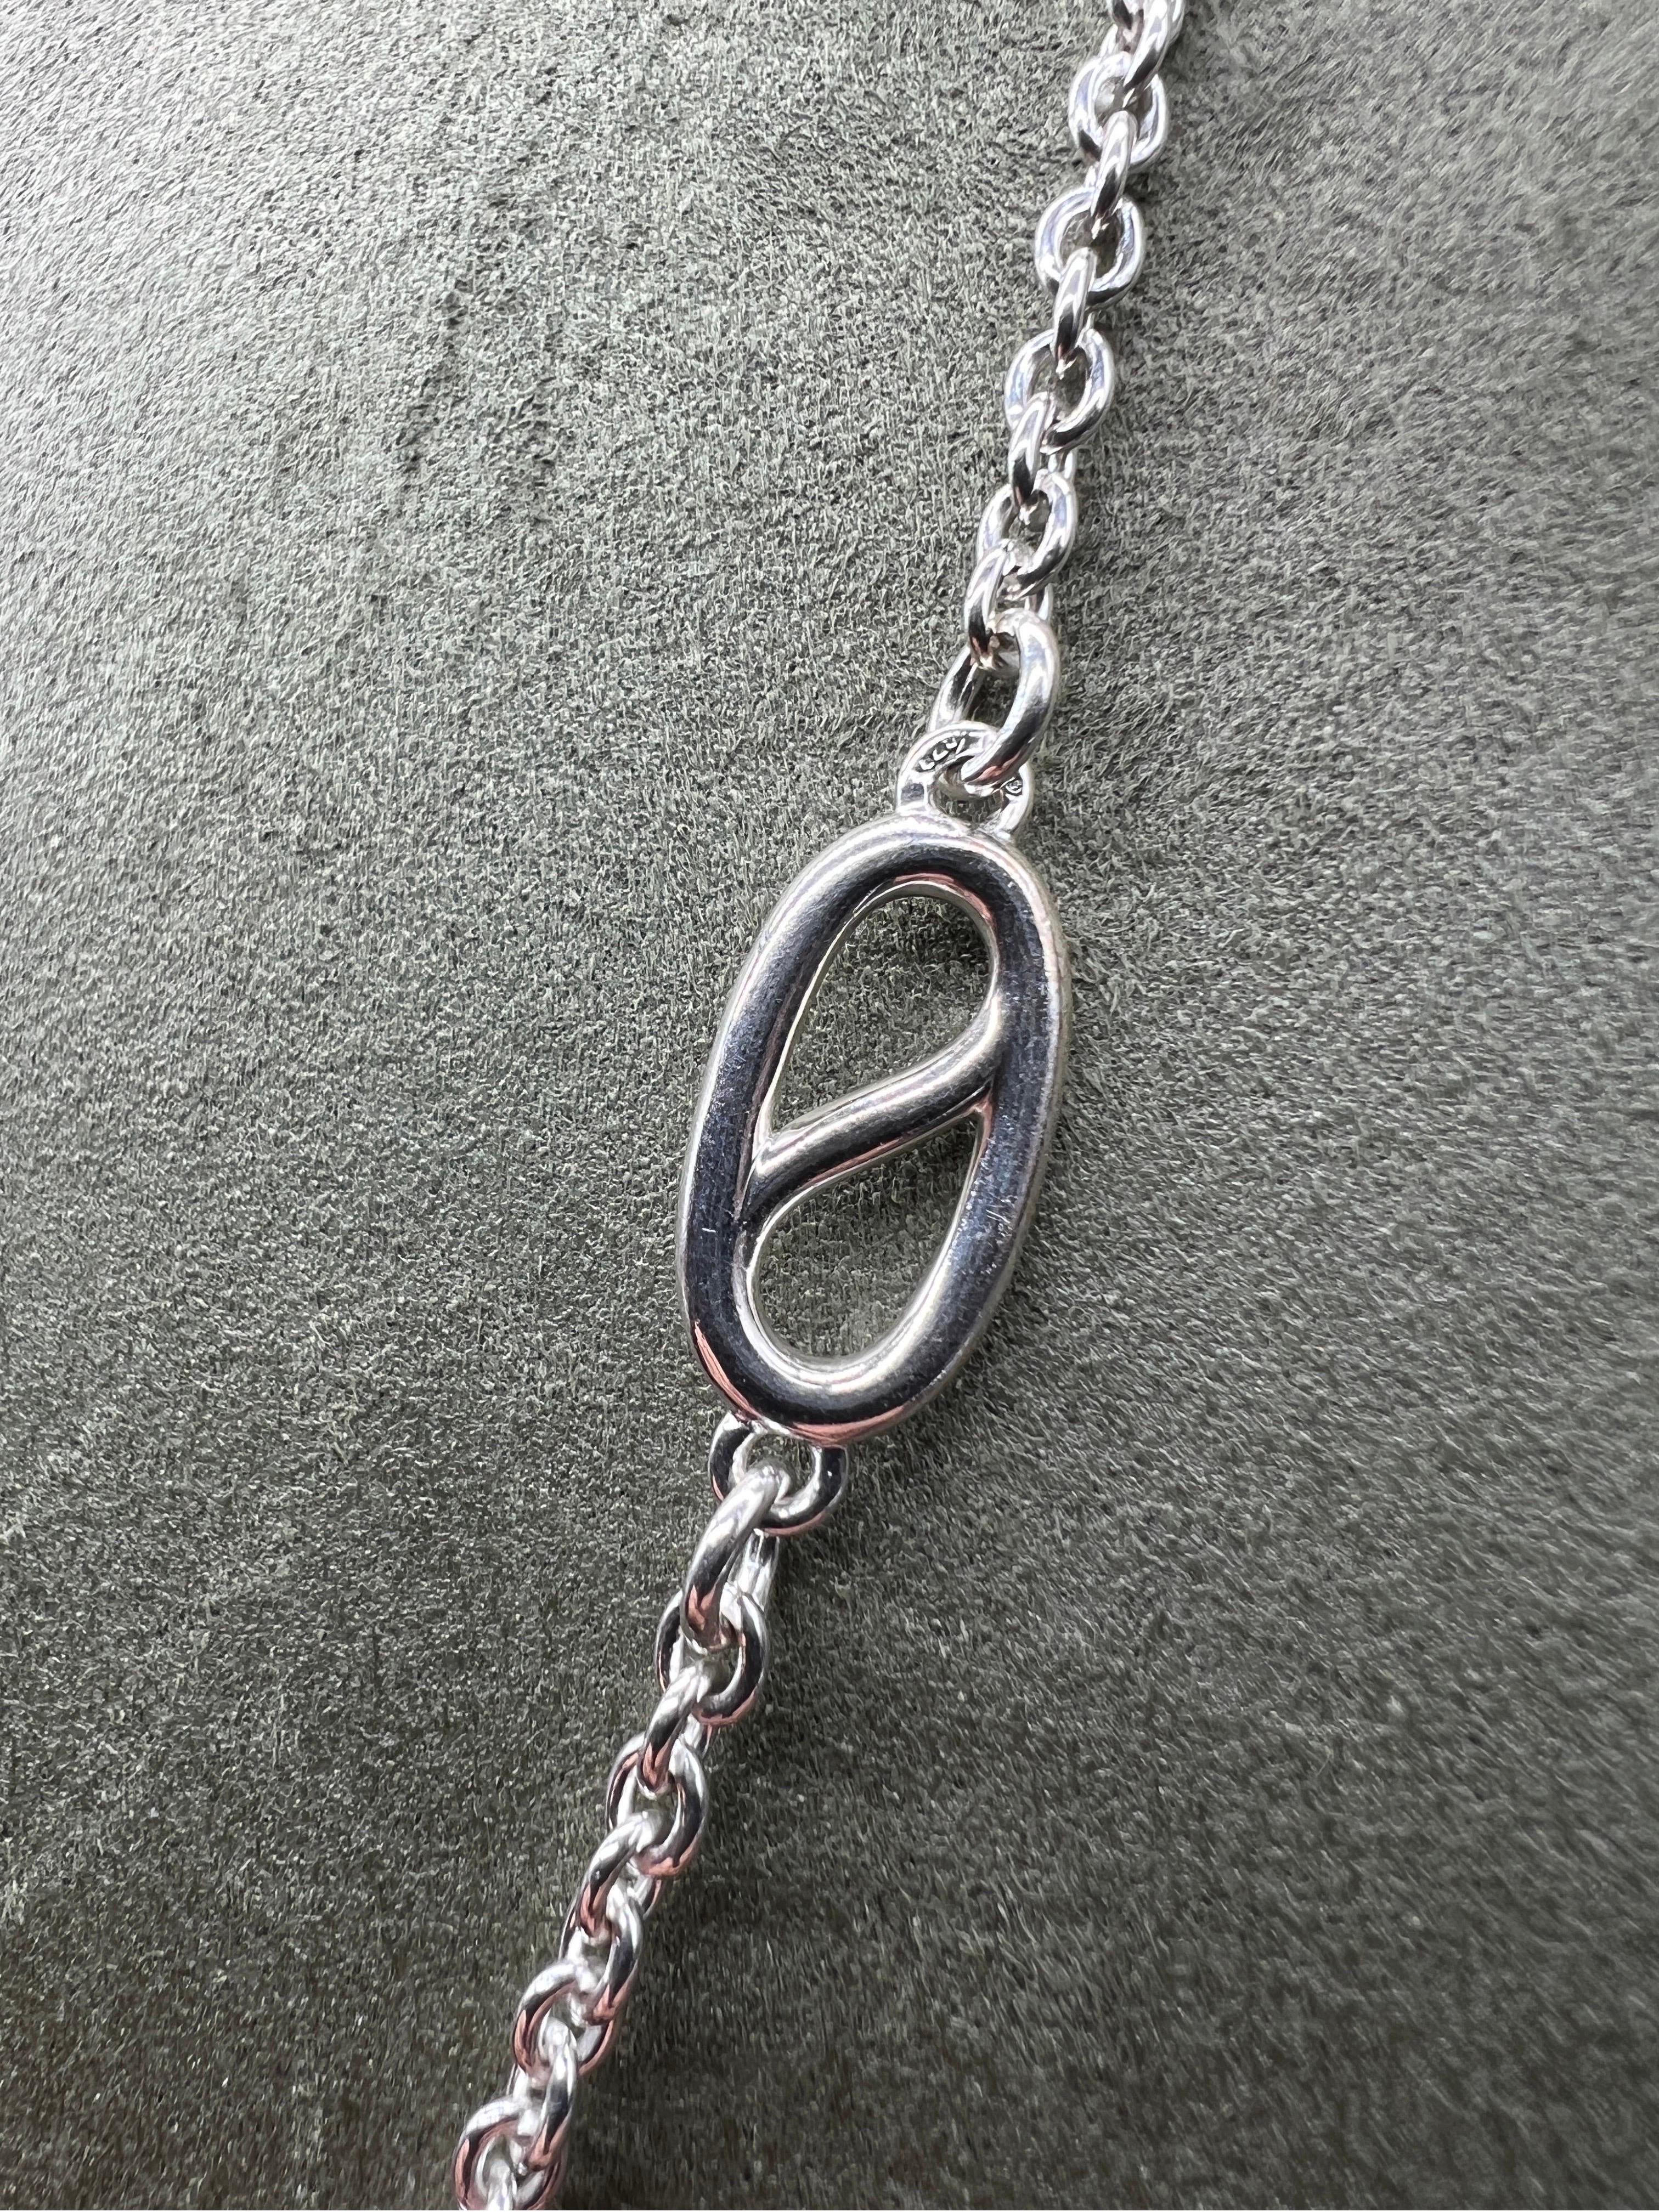 Treat yourself to an exceptional piece with this sumptuous 925/1000 sterling silver link necklace with timeless vintage style. Made from solid 925/1000 silver, this necklace chain features a master hallmark, guaranteeing its authenticity and value.